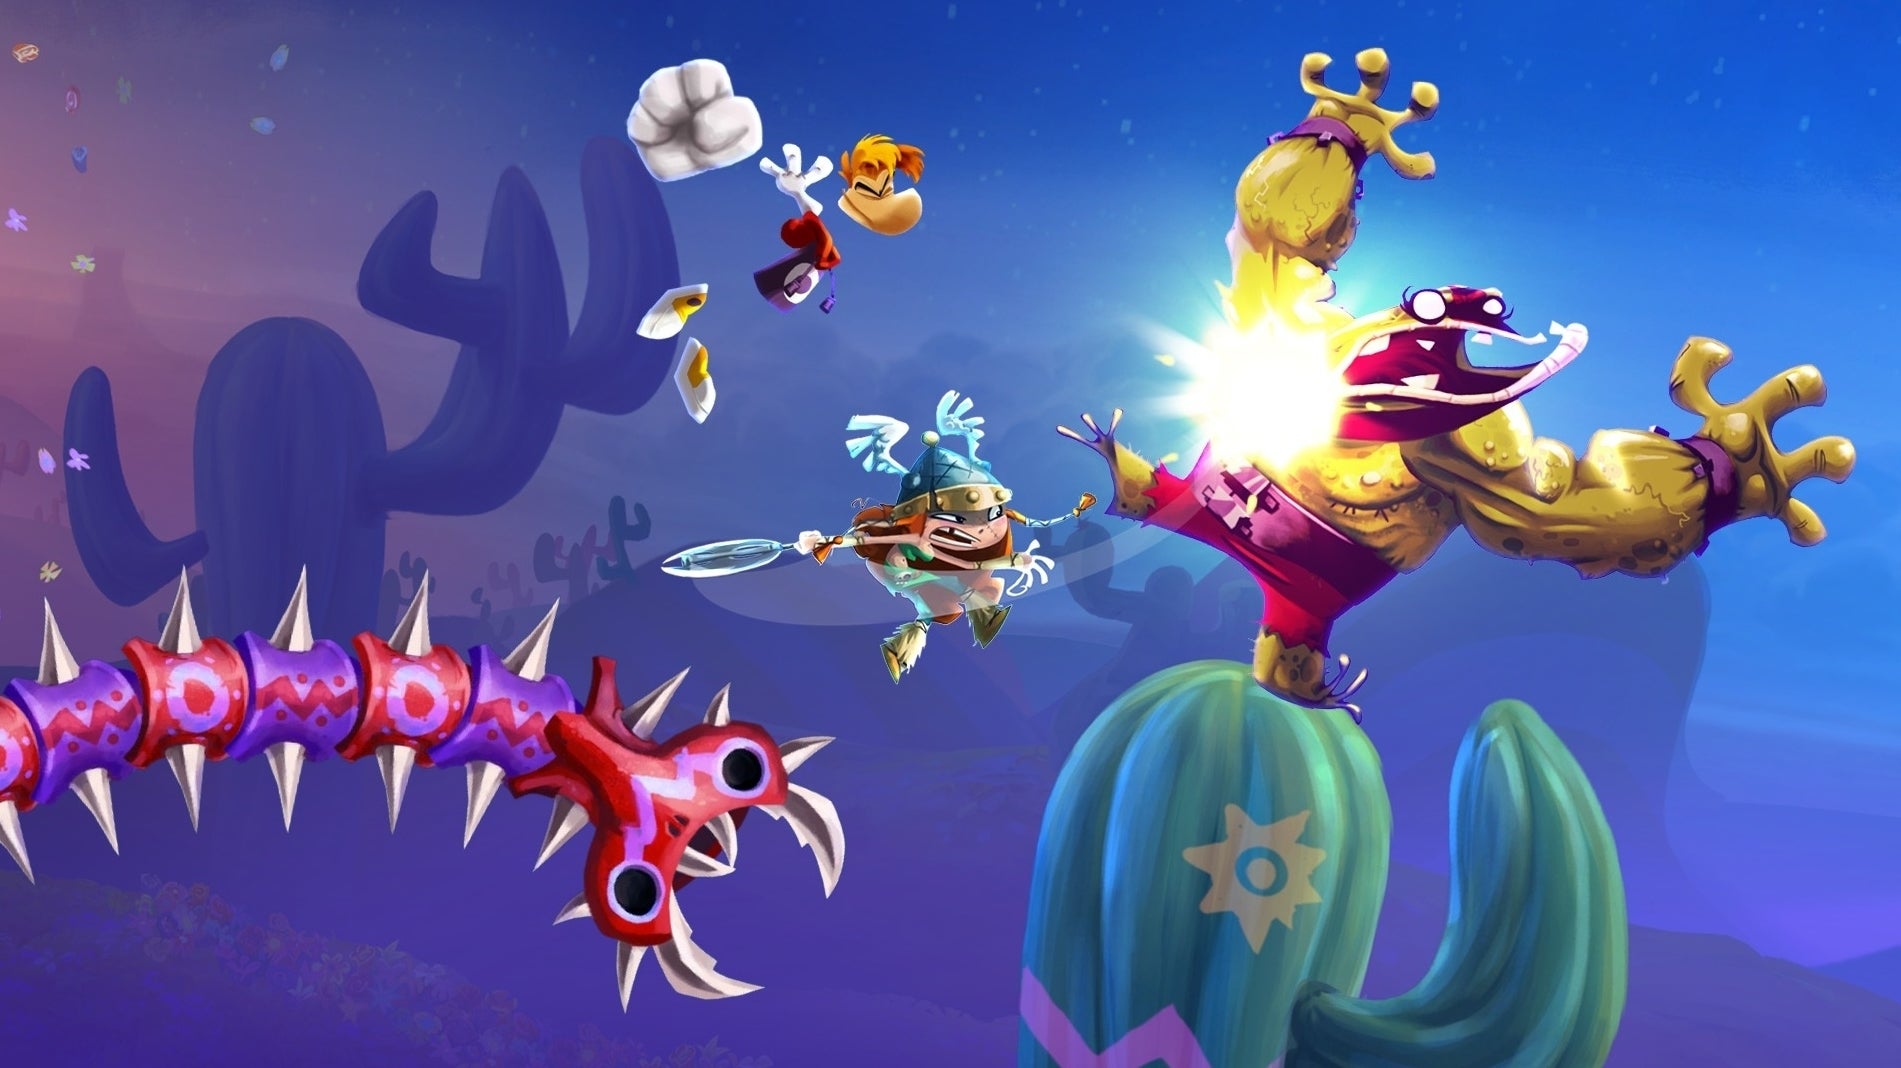 Image for Rayman Legends is currently free on the Epic Store